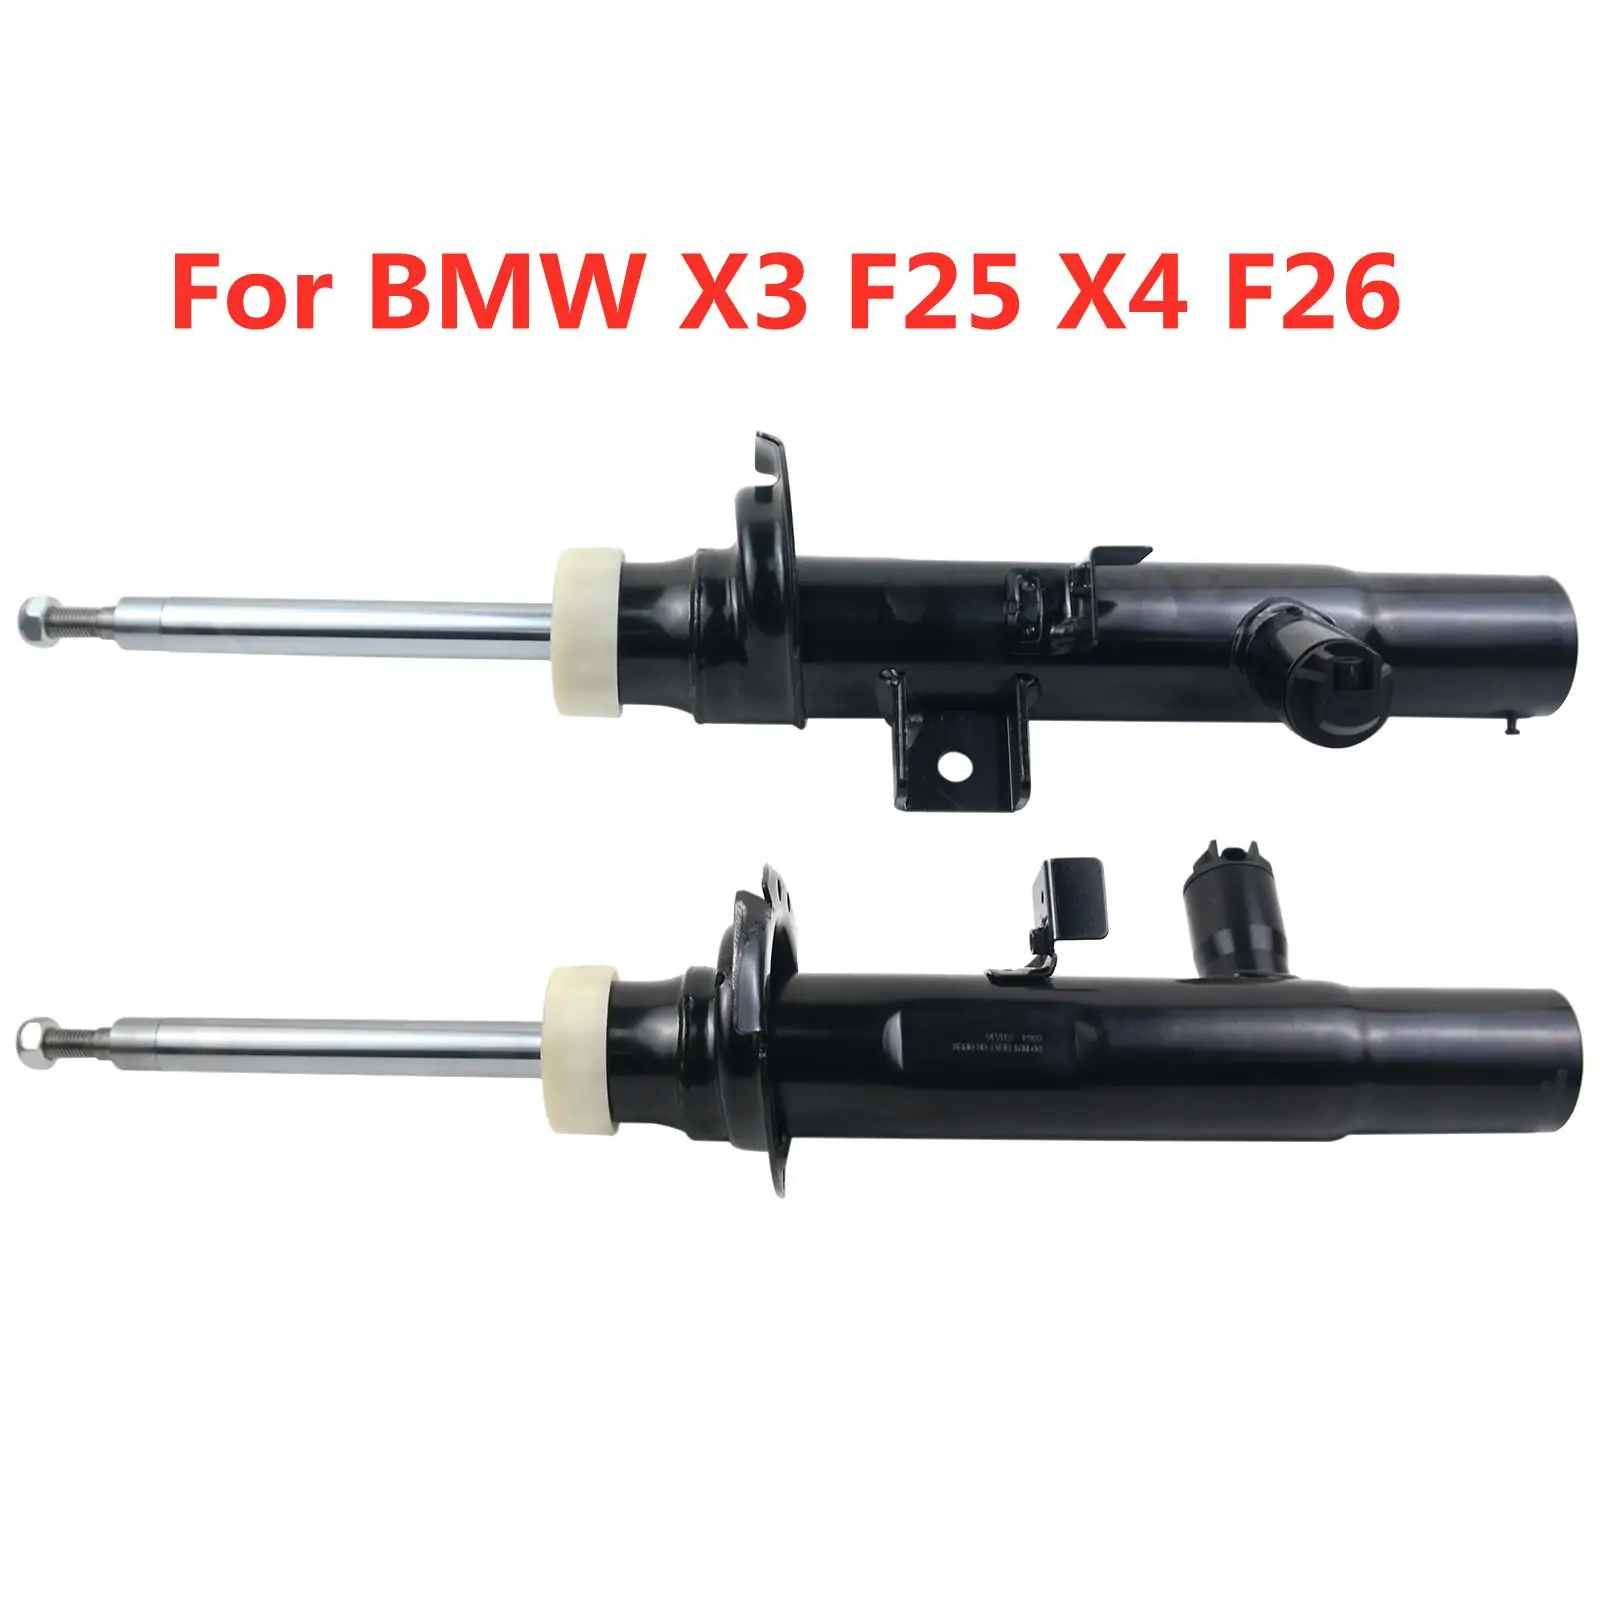 

AP03 New 2pcs Front Left Right Shock Struts Absorbers for BMW X3 F25 X4 F26 35i 2011-2017 37116797025 37116797026